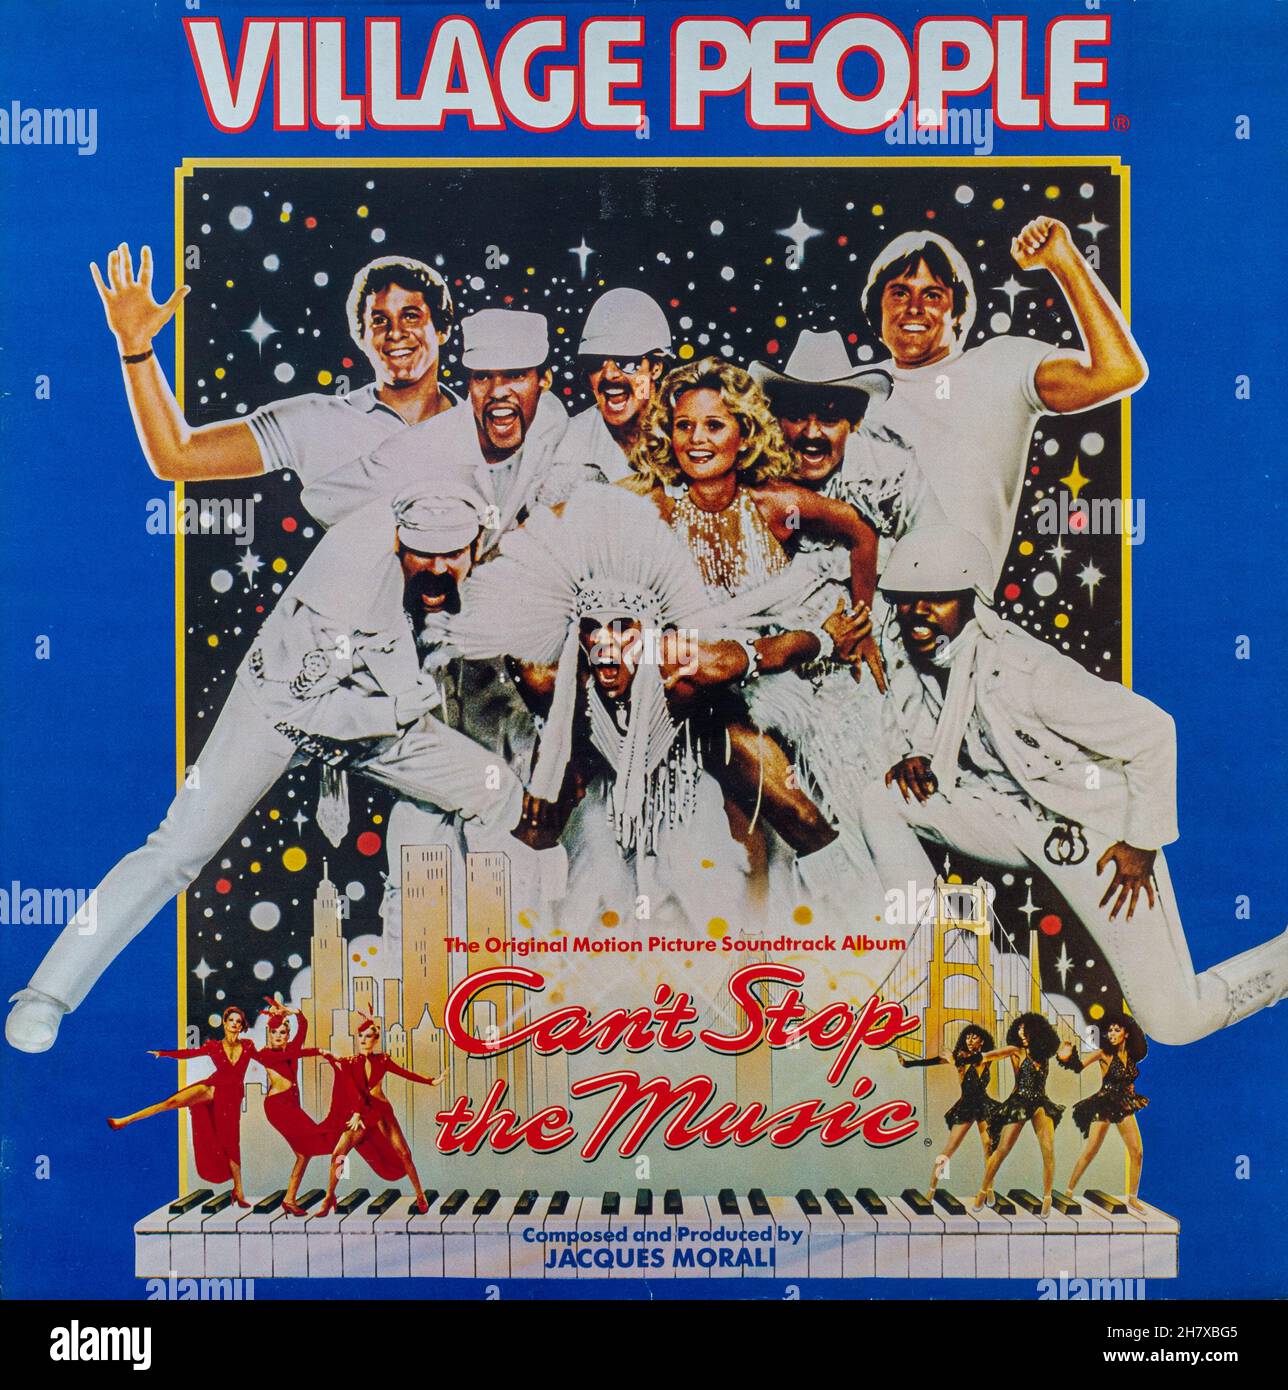 Village People, Can't Stop the Music, 1980 vinyl LP record cover, soundtrack album by the American disco group Stock Photo